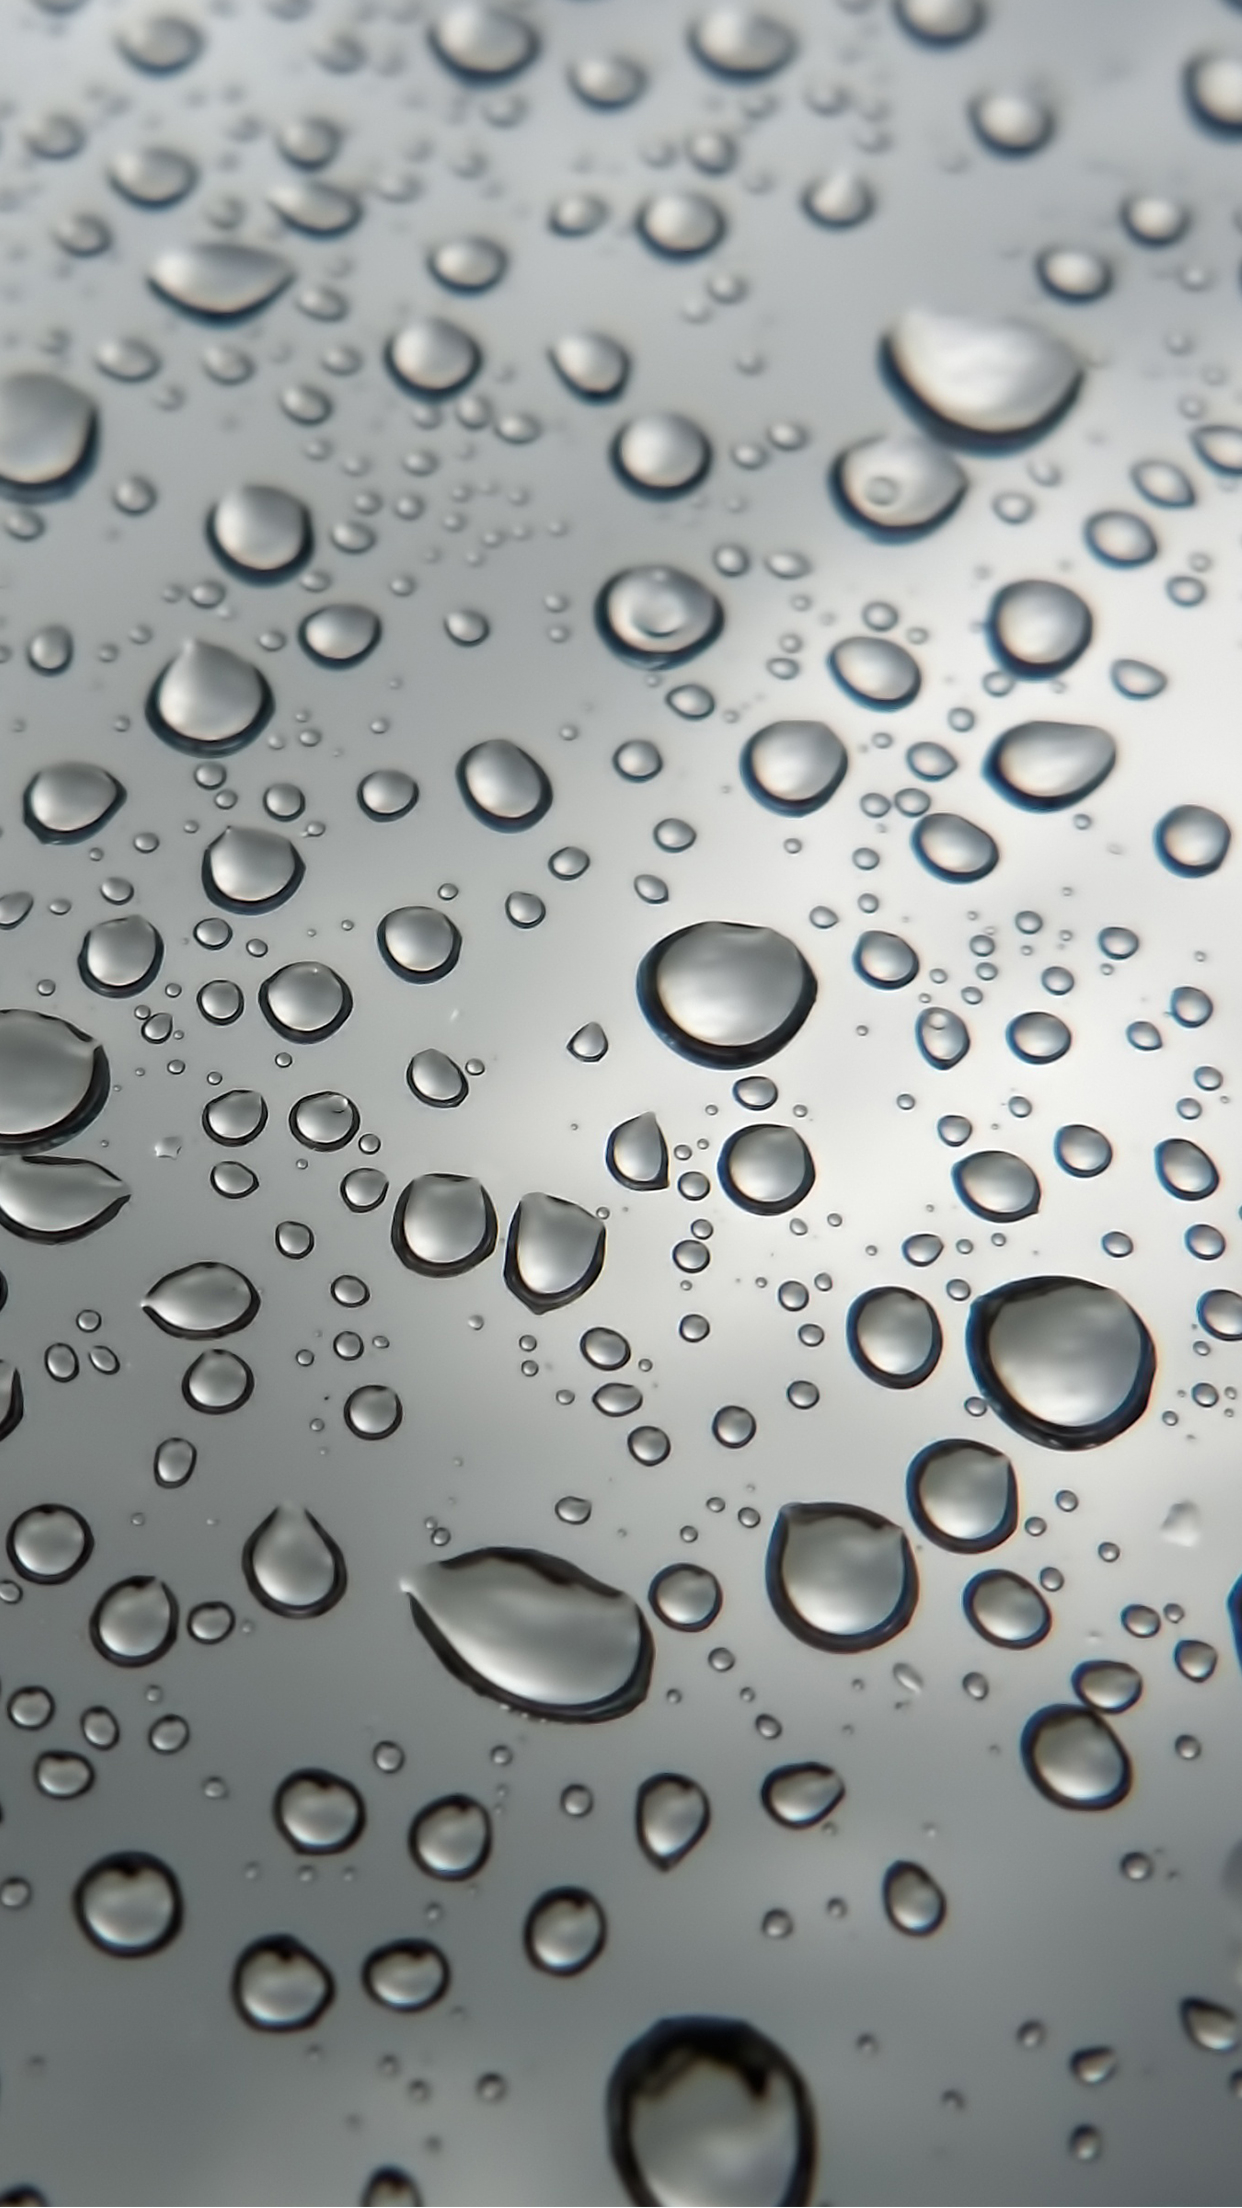 1242x2208 Raindrop Wallpaper for iPhone 11, Pro Max, X, 8, 7, 6 Free Download on 3Wallpapers